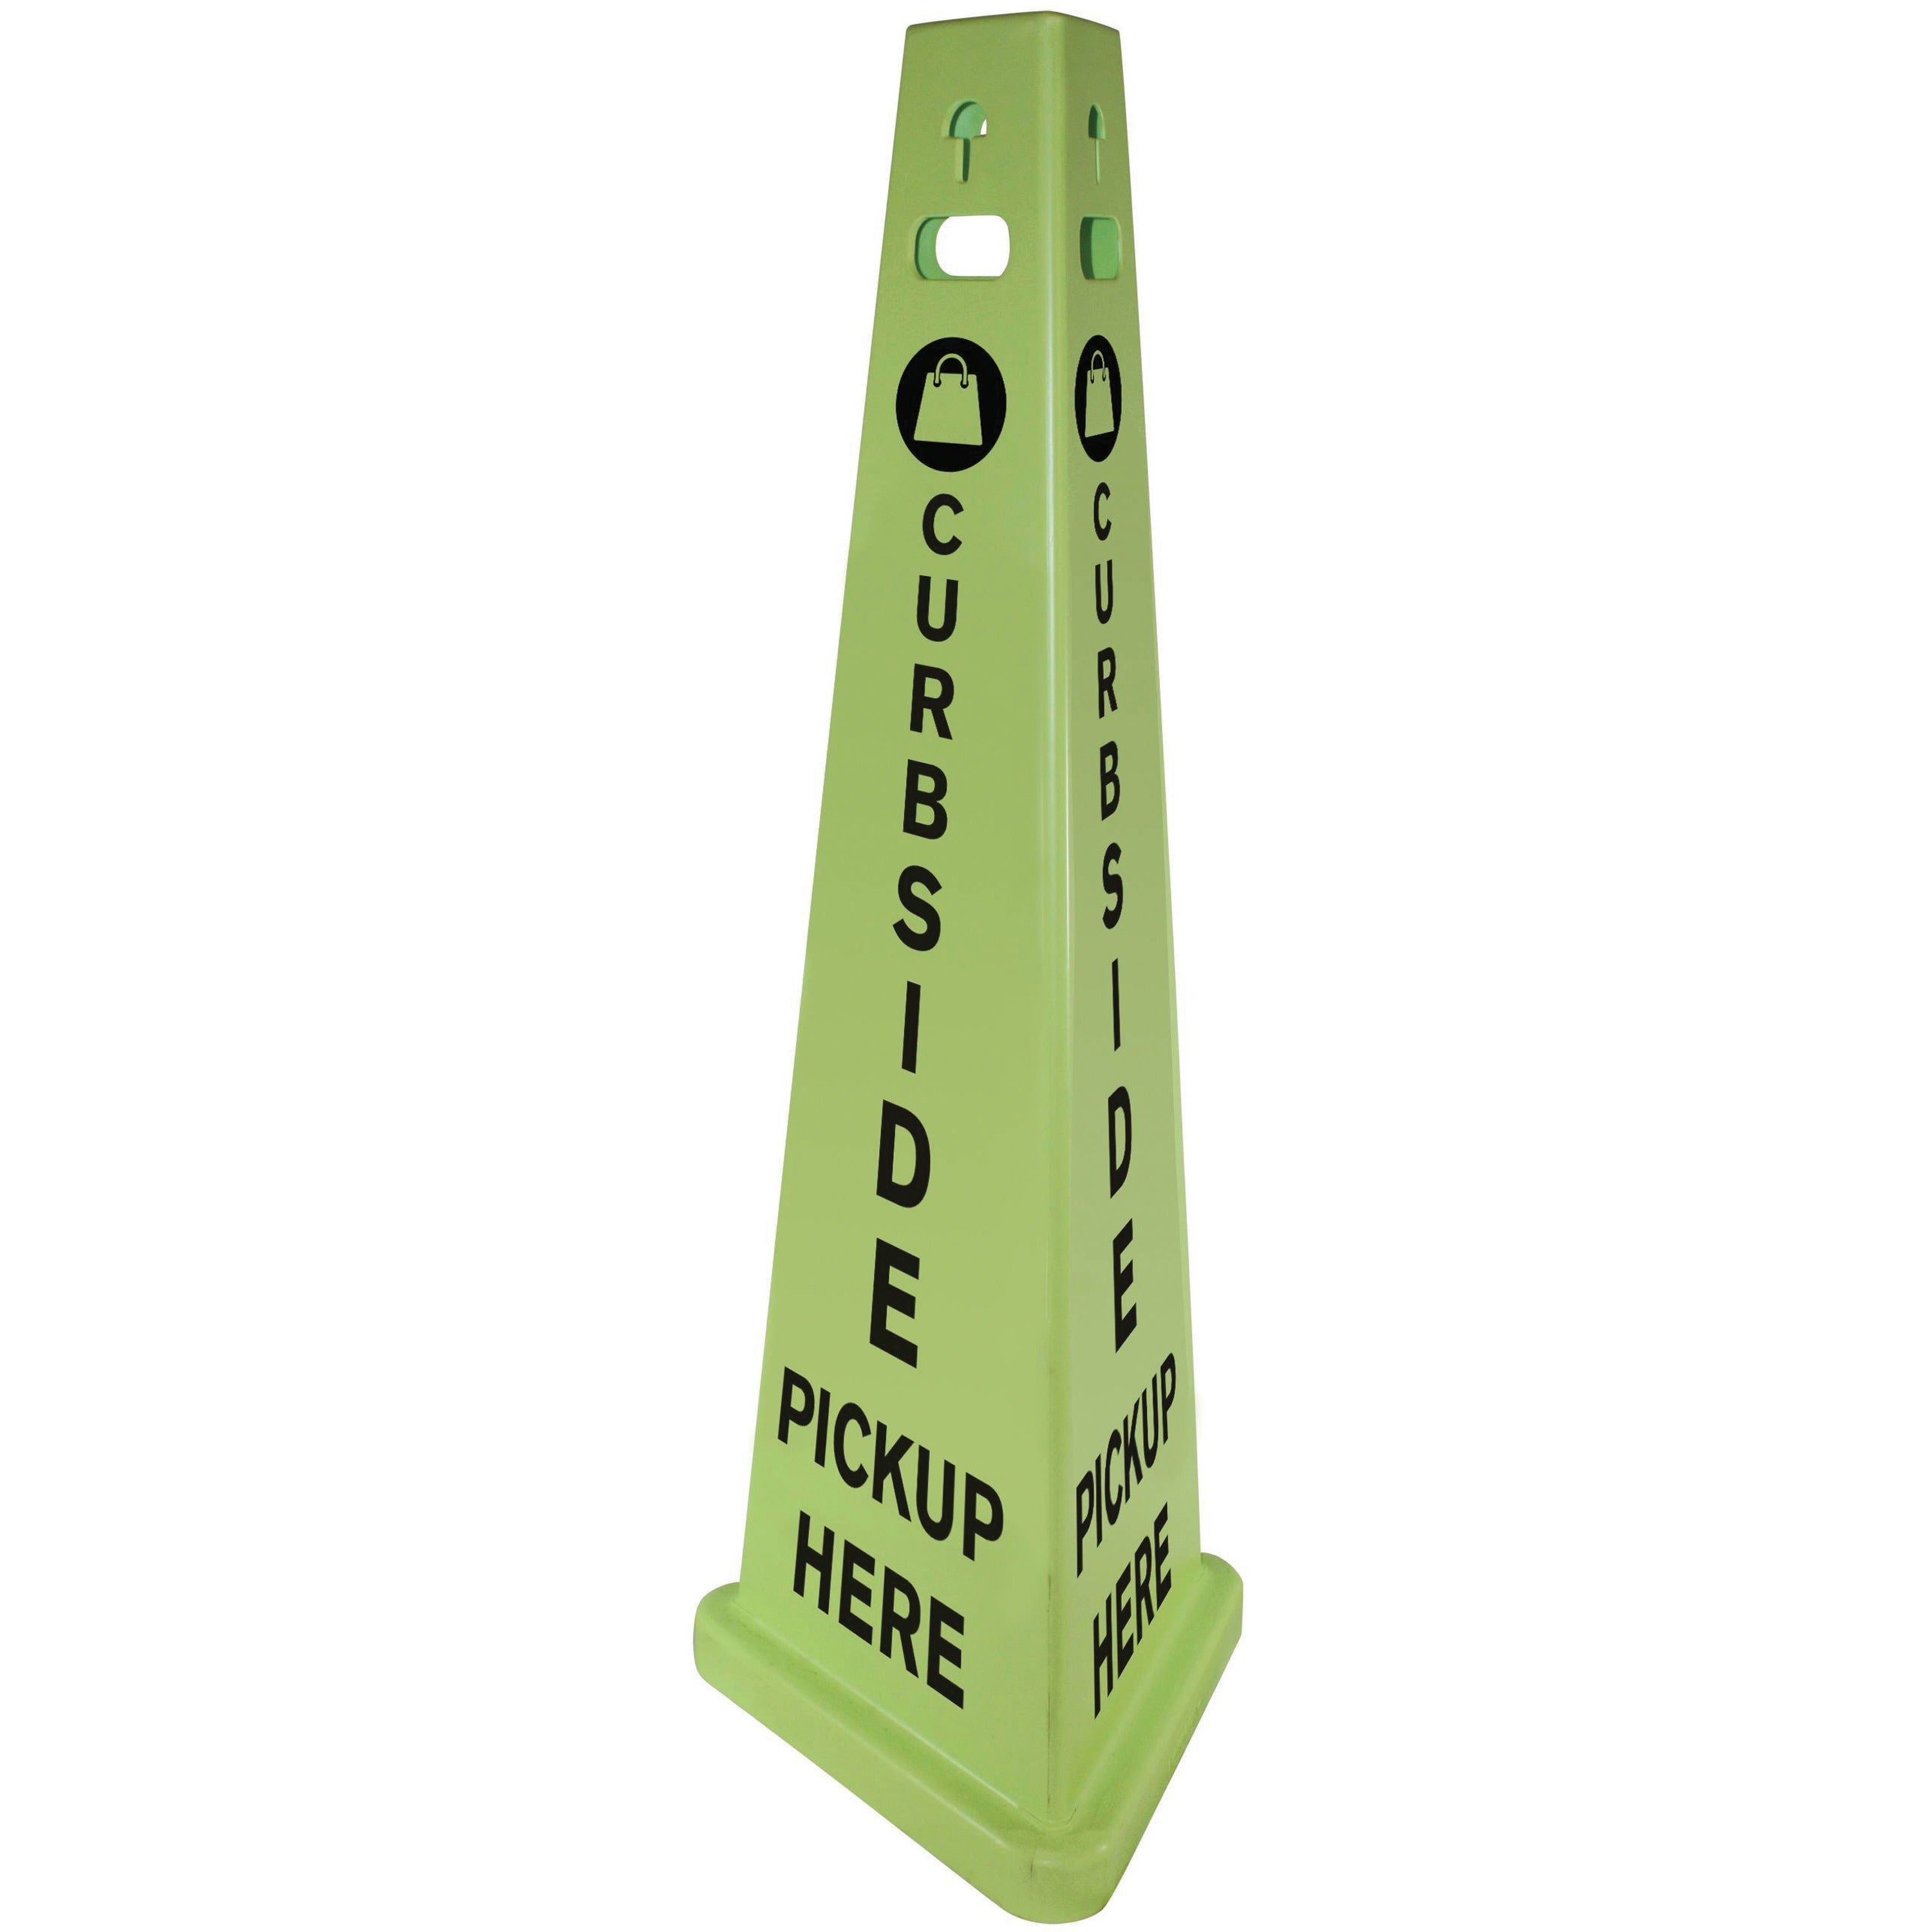 impact-trivu-3-sided-curbside-pickup-safety-sign-3-carton-curbside-pickup-here-print-message-148-width-x-40-height-x-148-depth-cone-shape-three-sided-uv-protected-plastic-fluorescent-yellow_imp9140pukit - 1